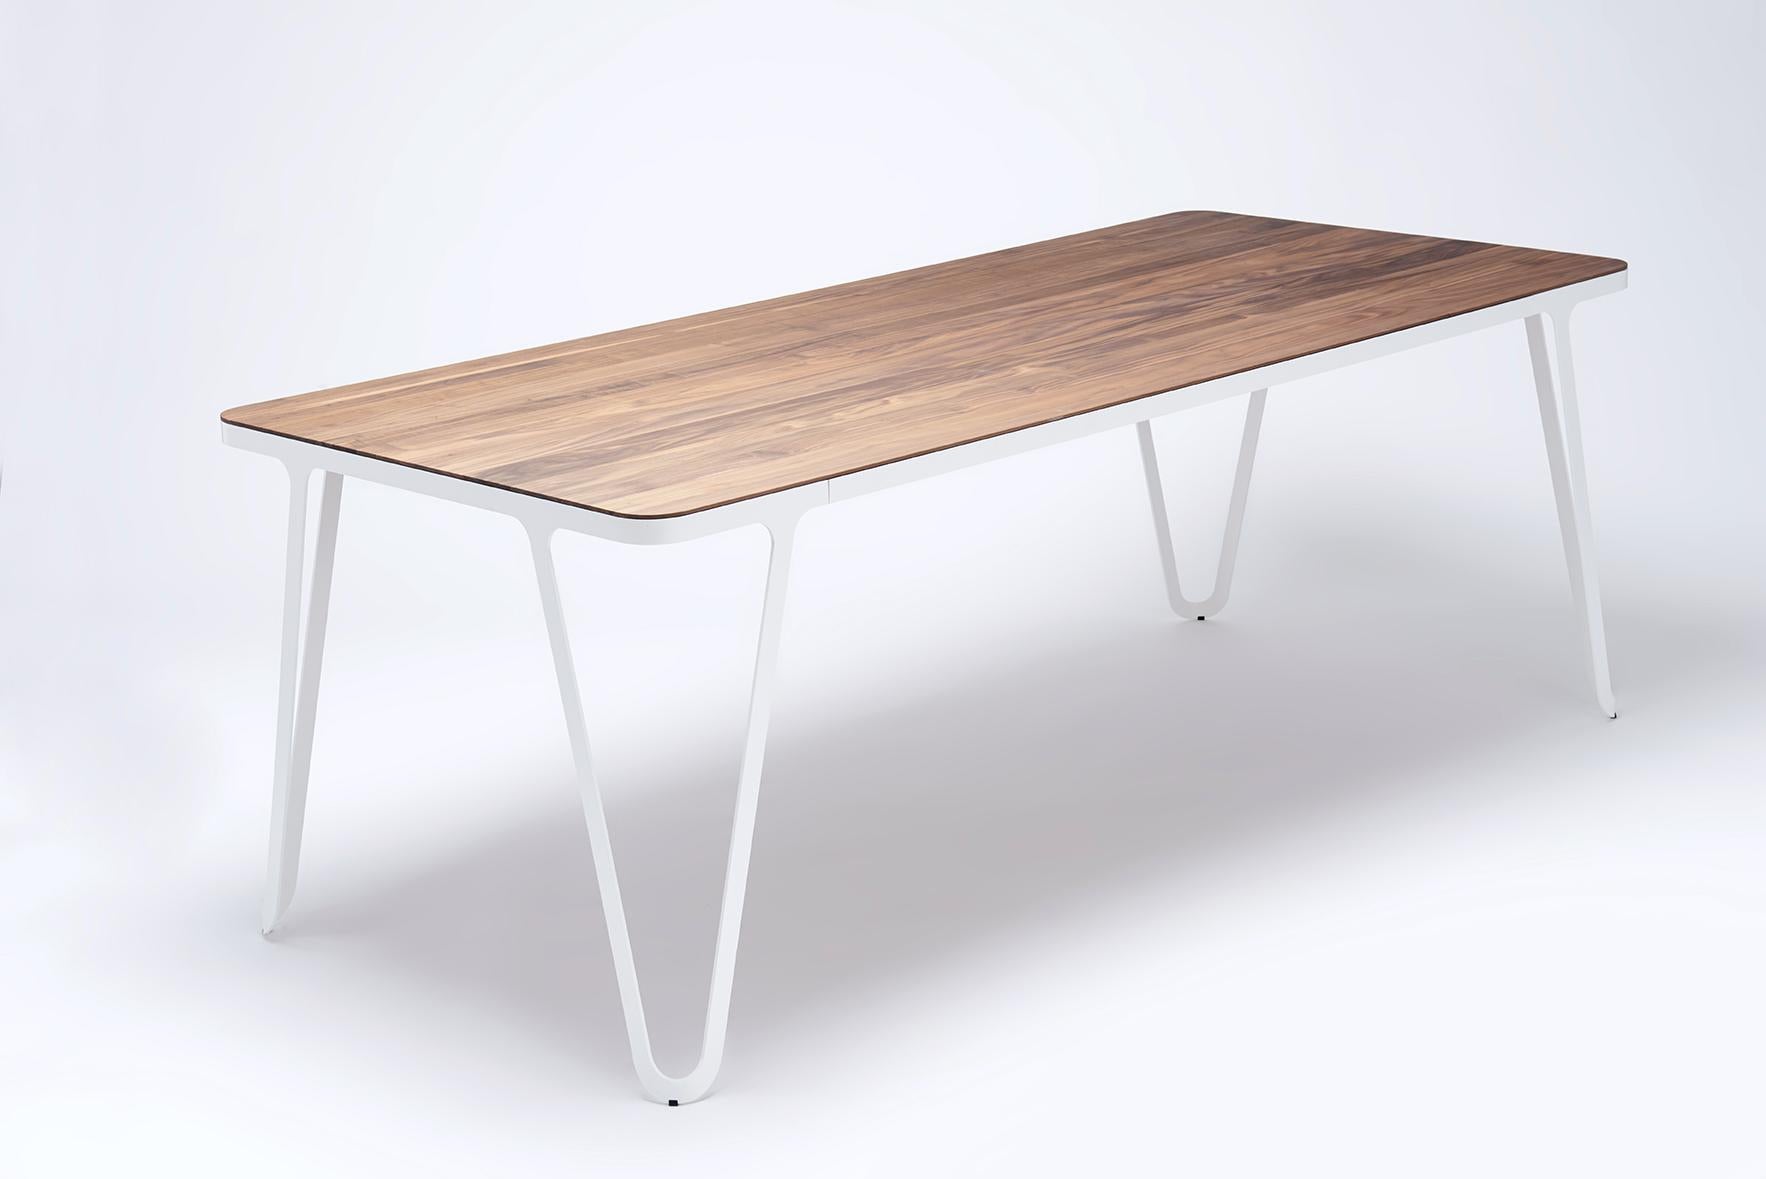 Loop table 200 walnut by Sebastian Scherer
Dimensions: D200 x W90 x H74 cm
Materials: Walnut, aluminium, wood
Weight: 57.8 kg
Also available: Colours: Solid wood (matt lacquered or oiled): black and white stained ash / natural oak / american